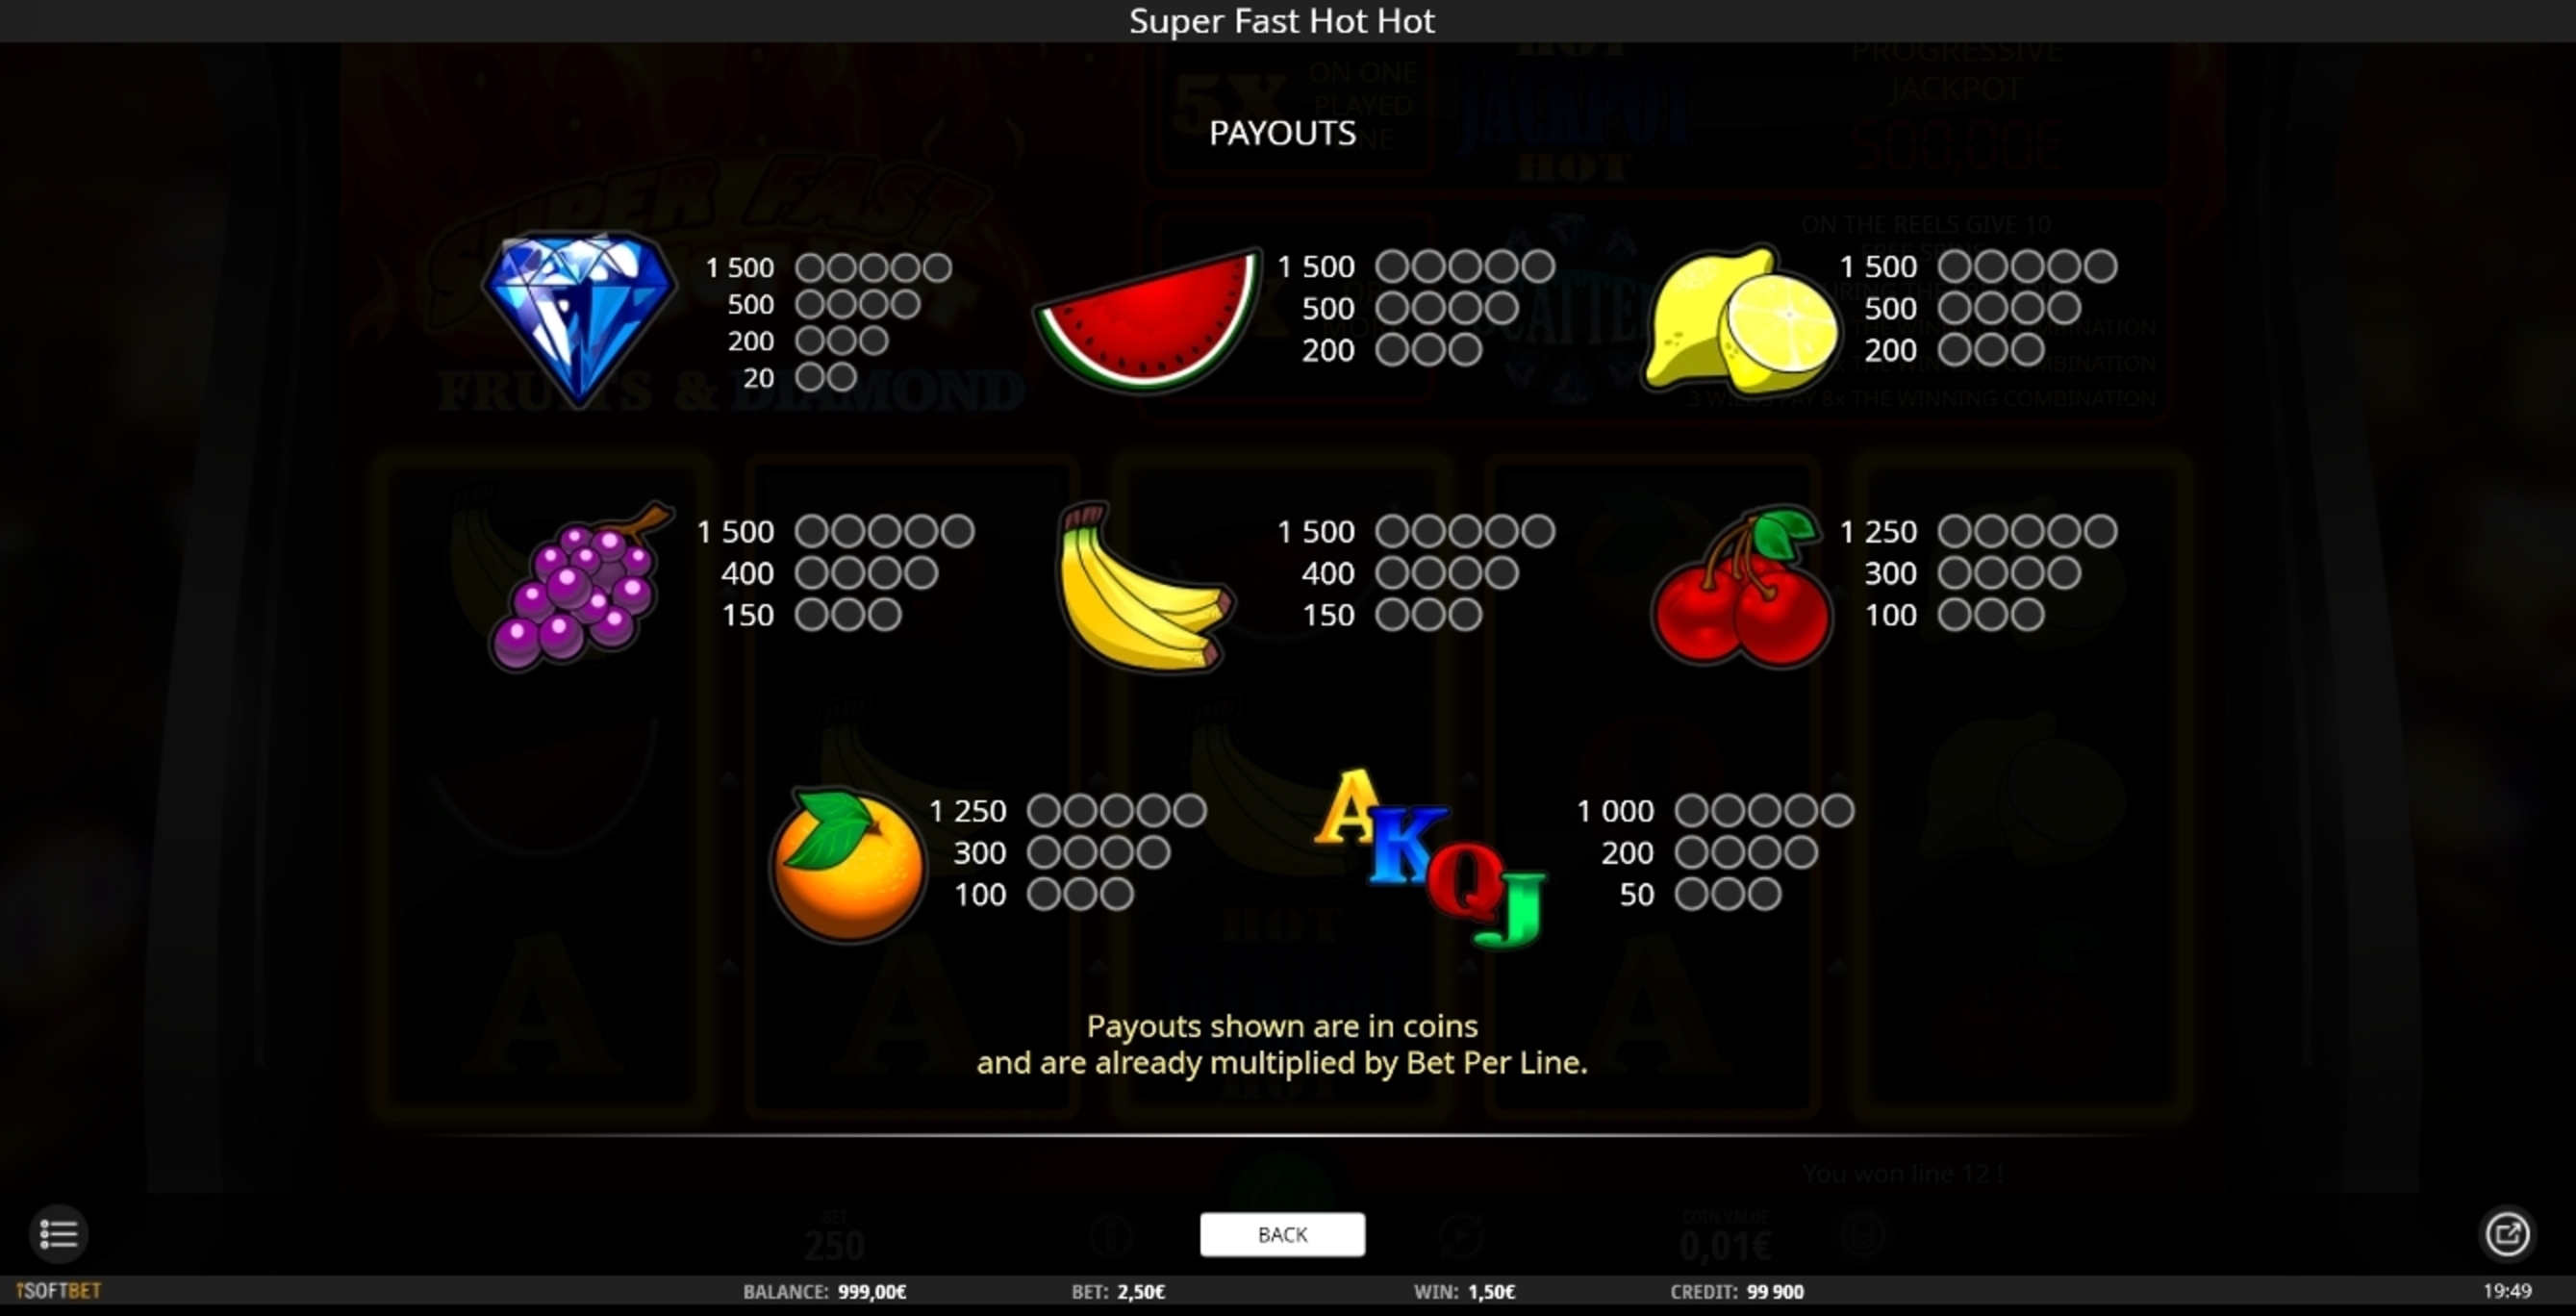 Info of Super Fast Hot Hot Slot Game by iSoftBet